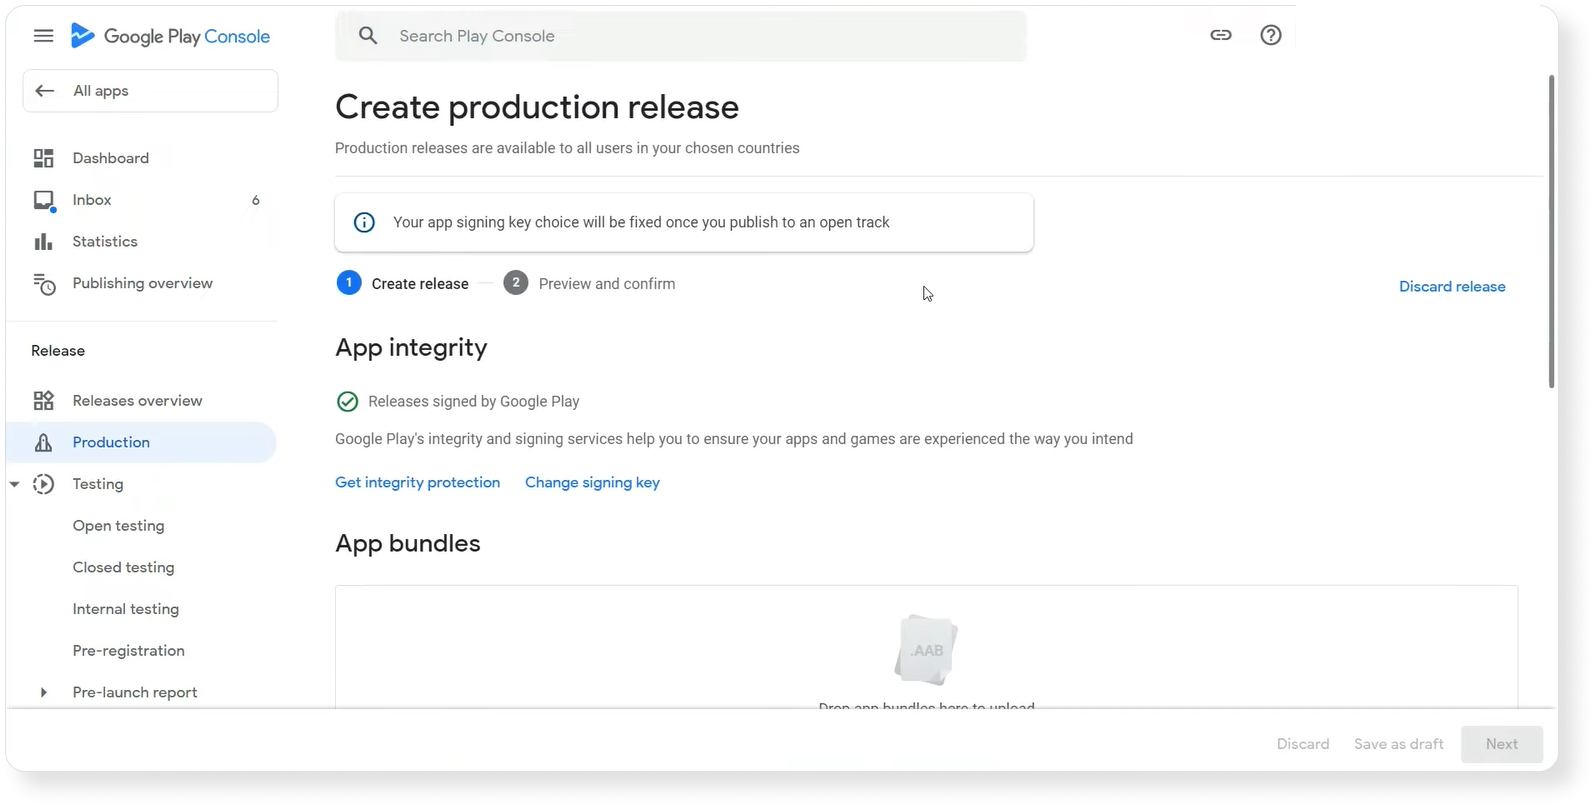 Create production release in Google Play